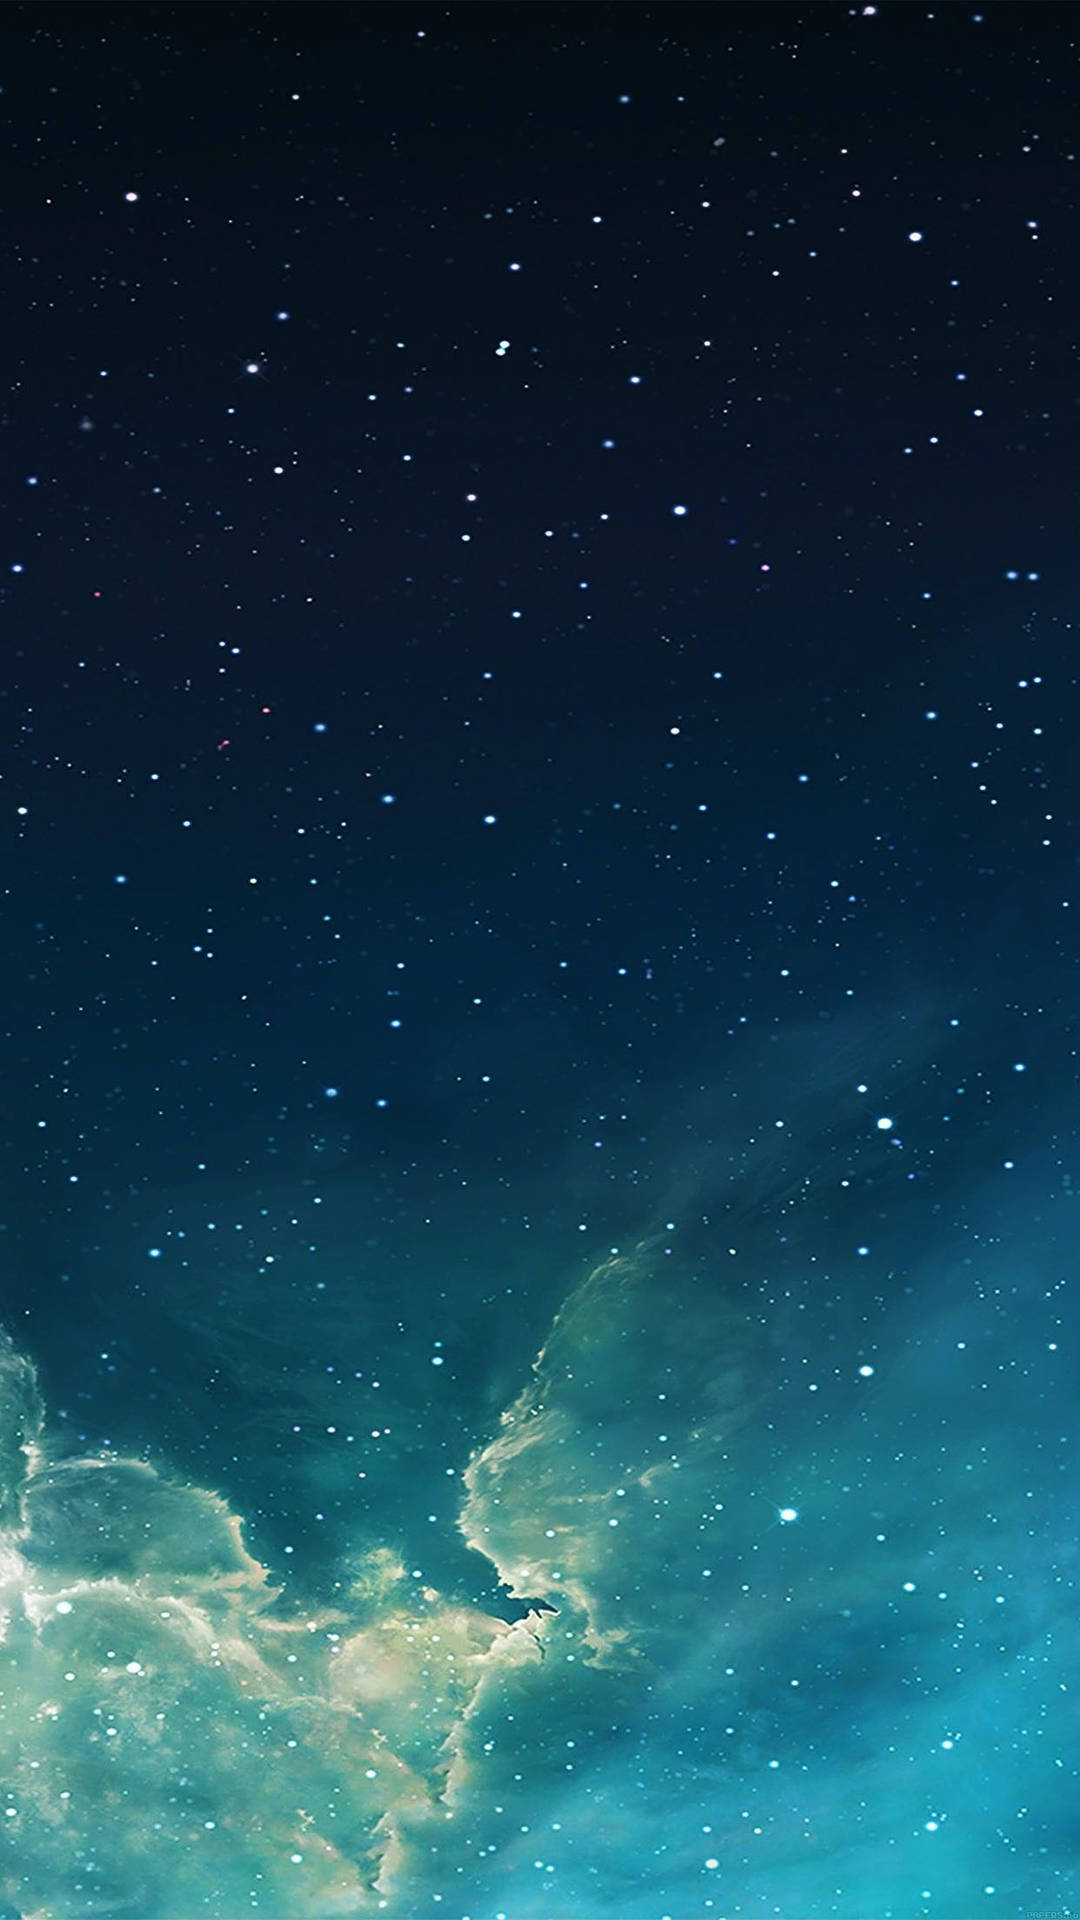 Explore The Beauty Of The Night Sky With This Majestic Starry Scene. Wallpaper